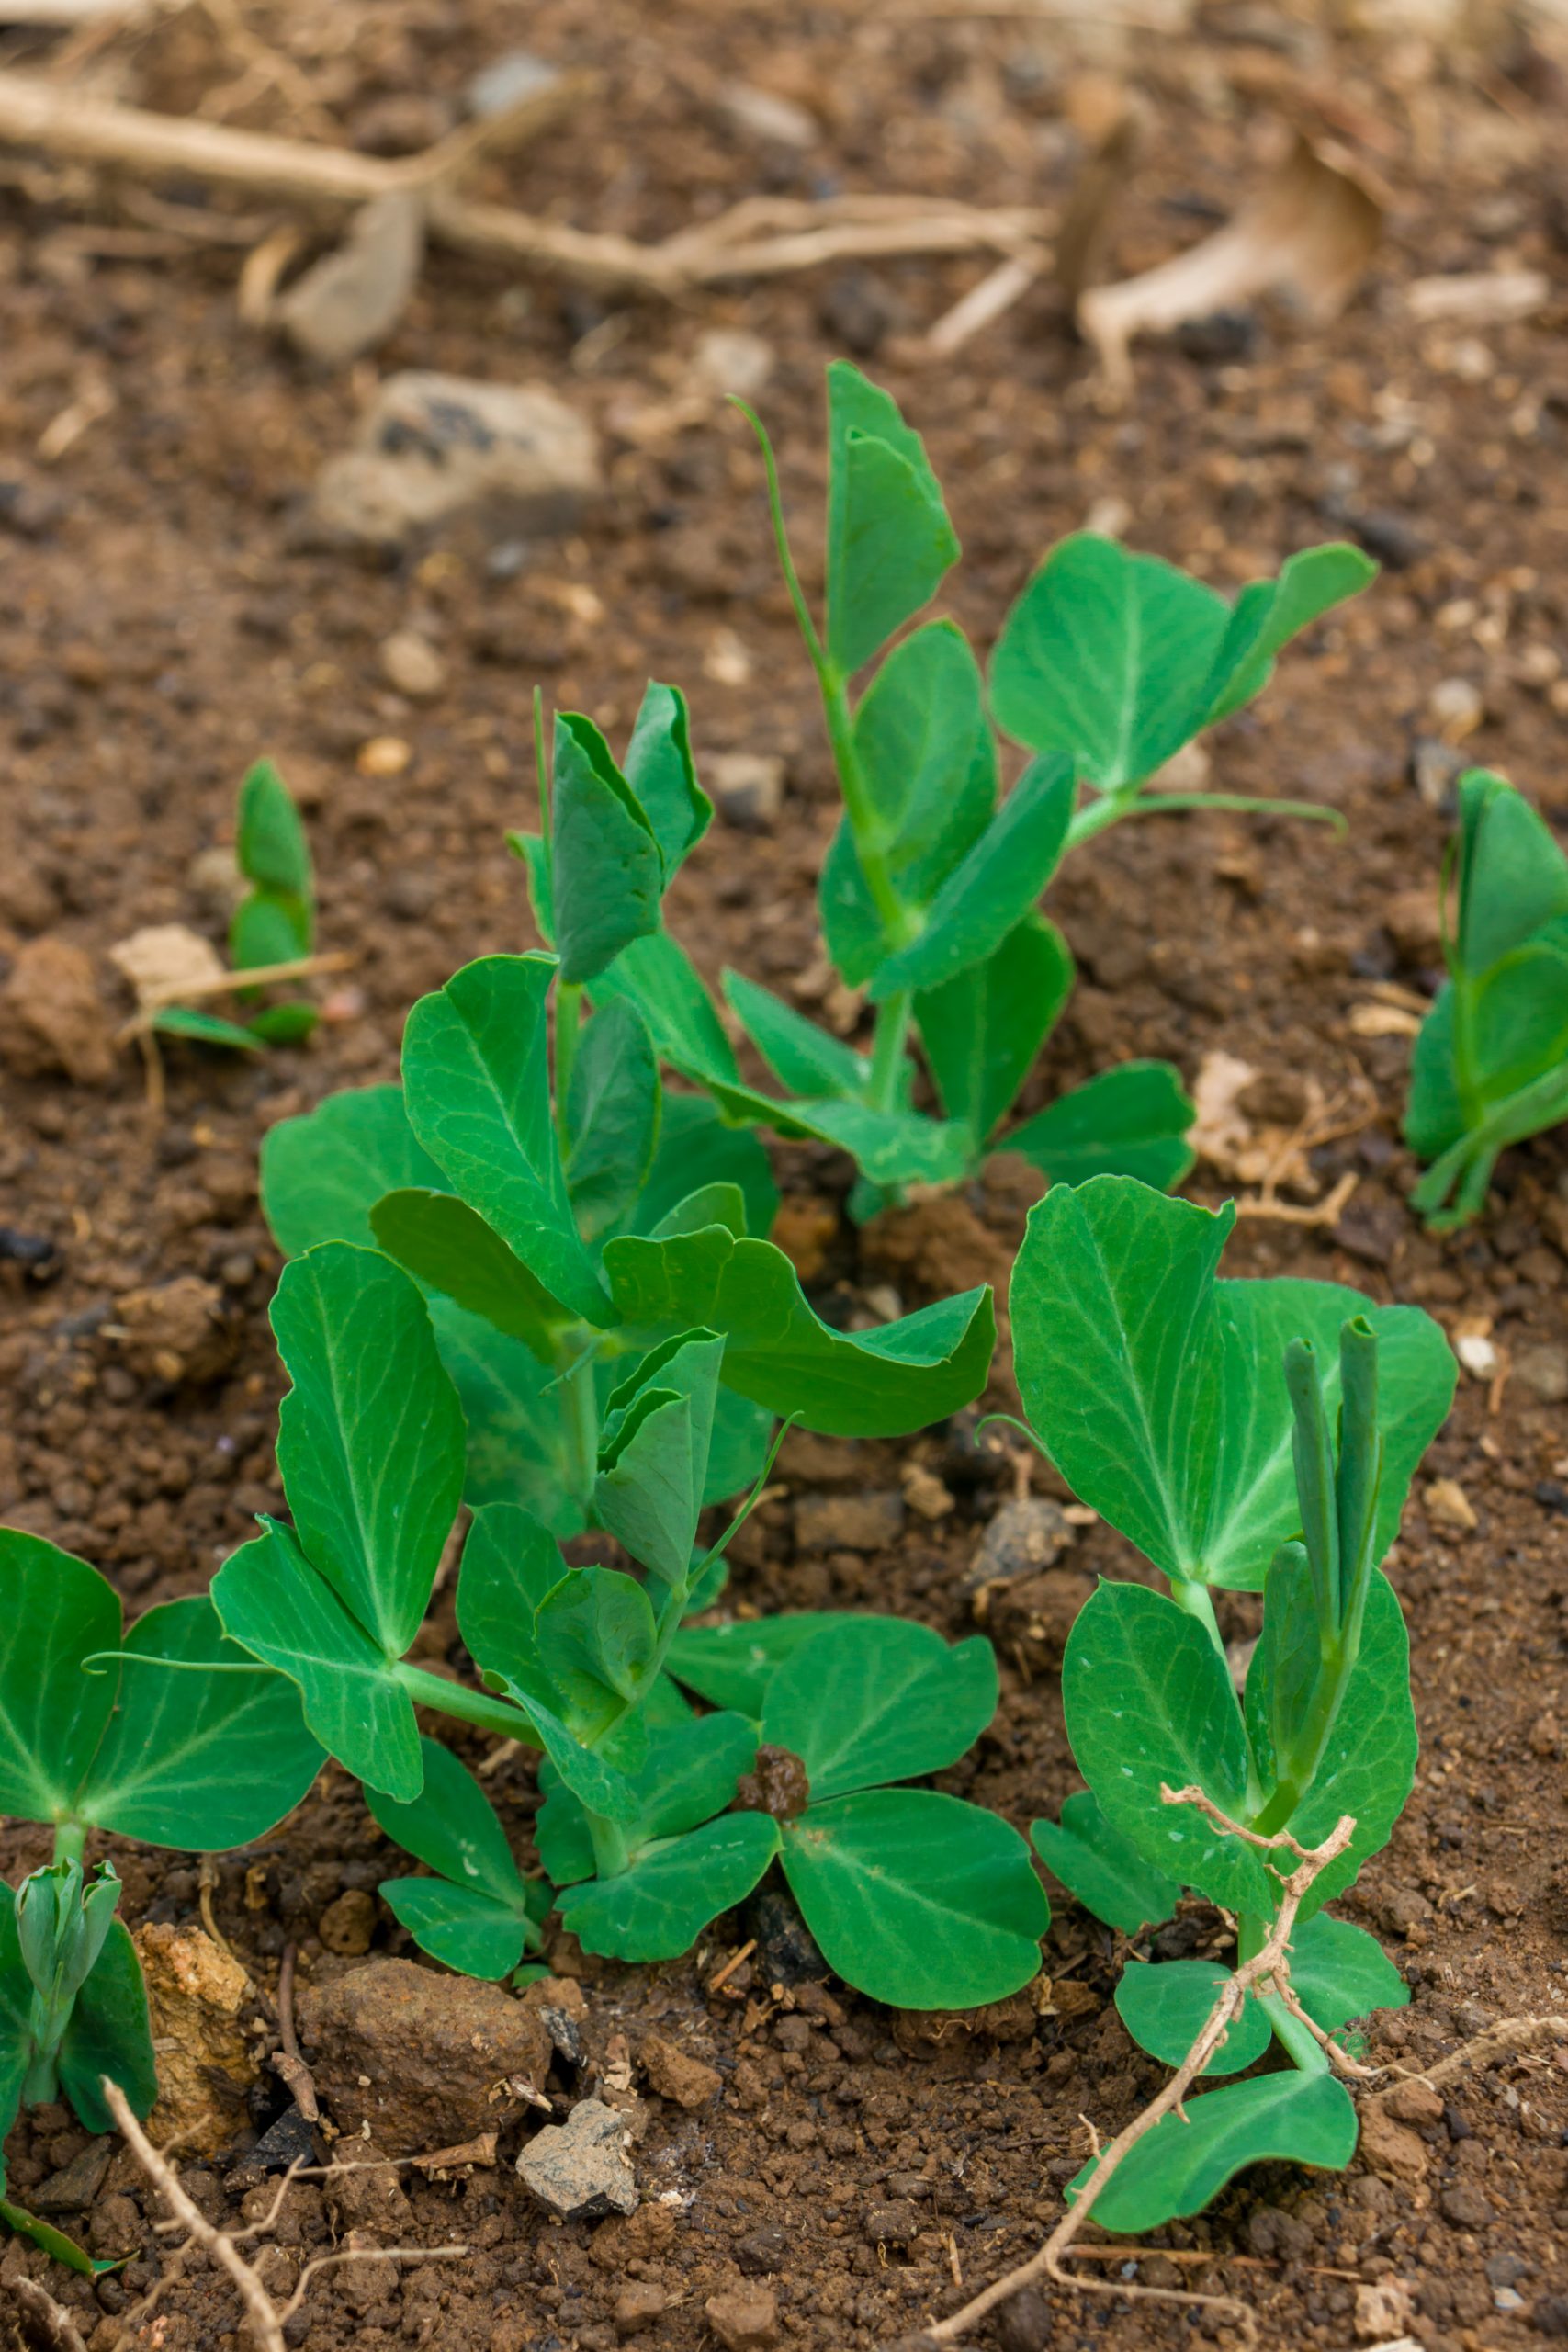 Young Pea plant